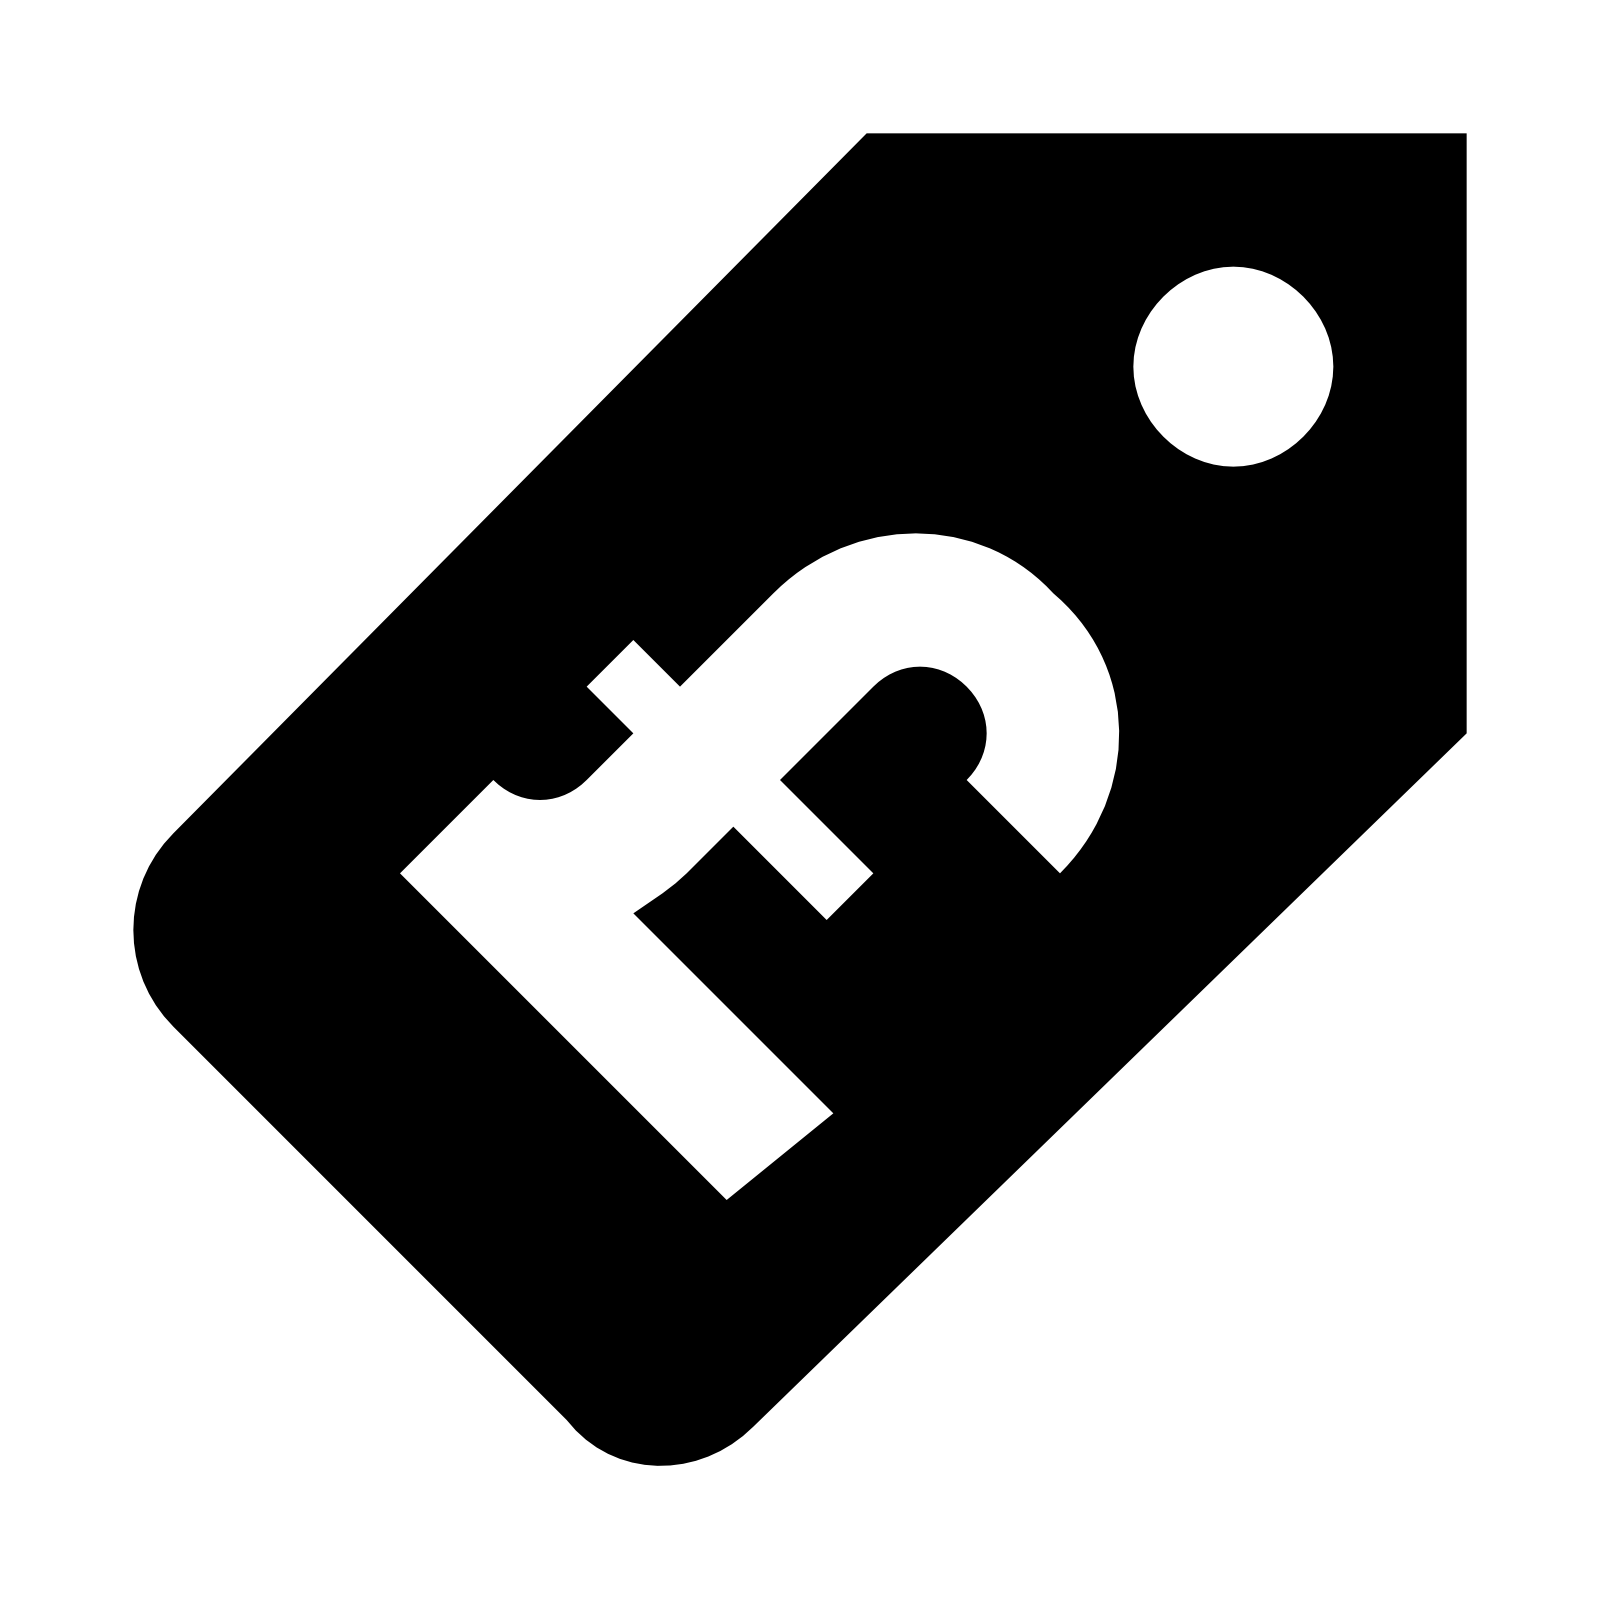 Pound Sign Vector PNG Image File